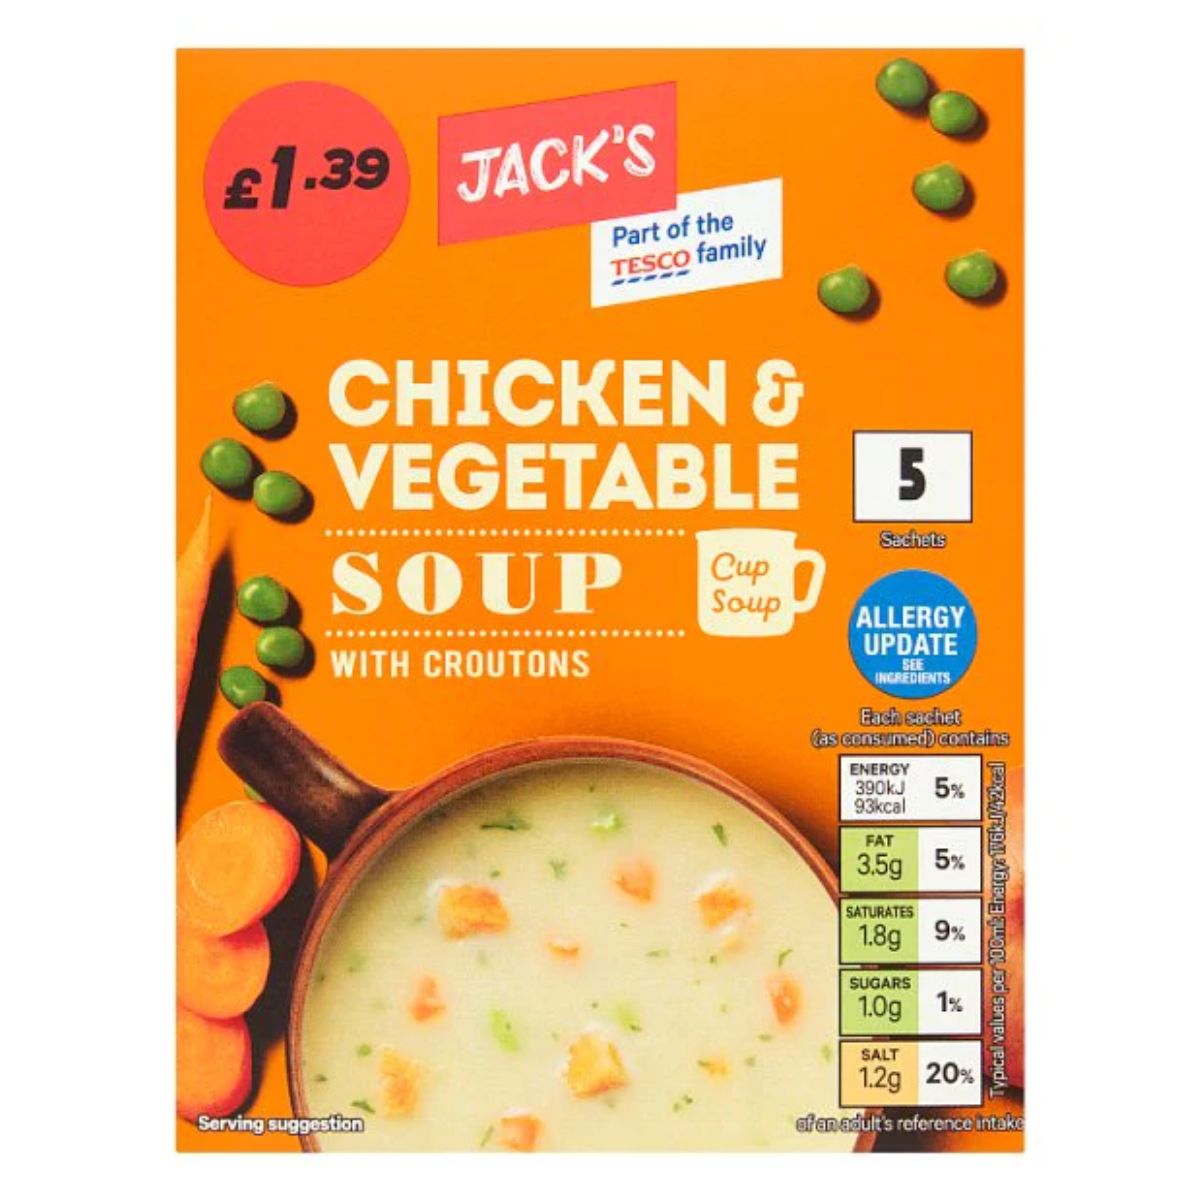 A package of Jacks - Chicken & Vegetable Cup Soup with Croutons - 110g displaying price and nutritional information.